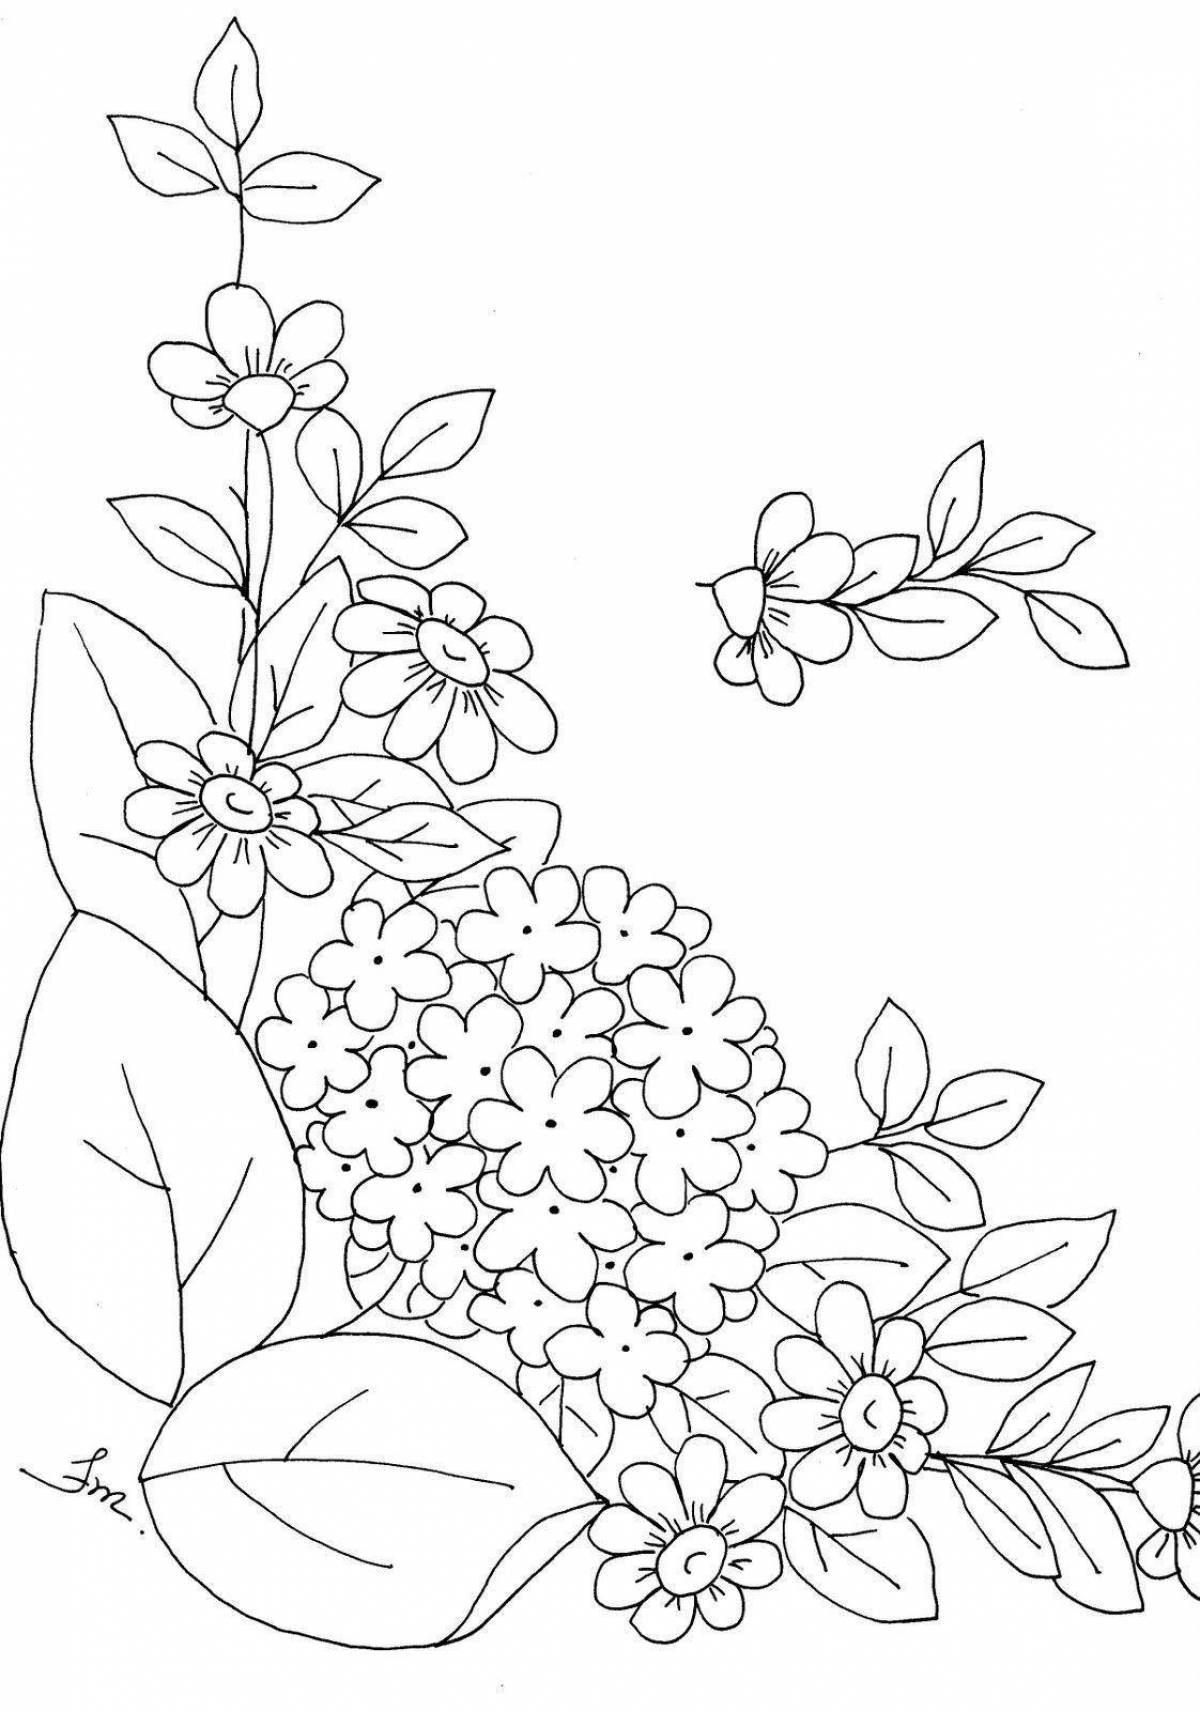 Exquisite lilac branch coloring book